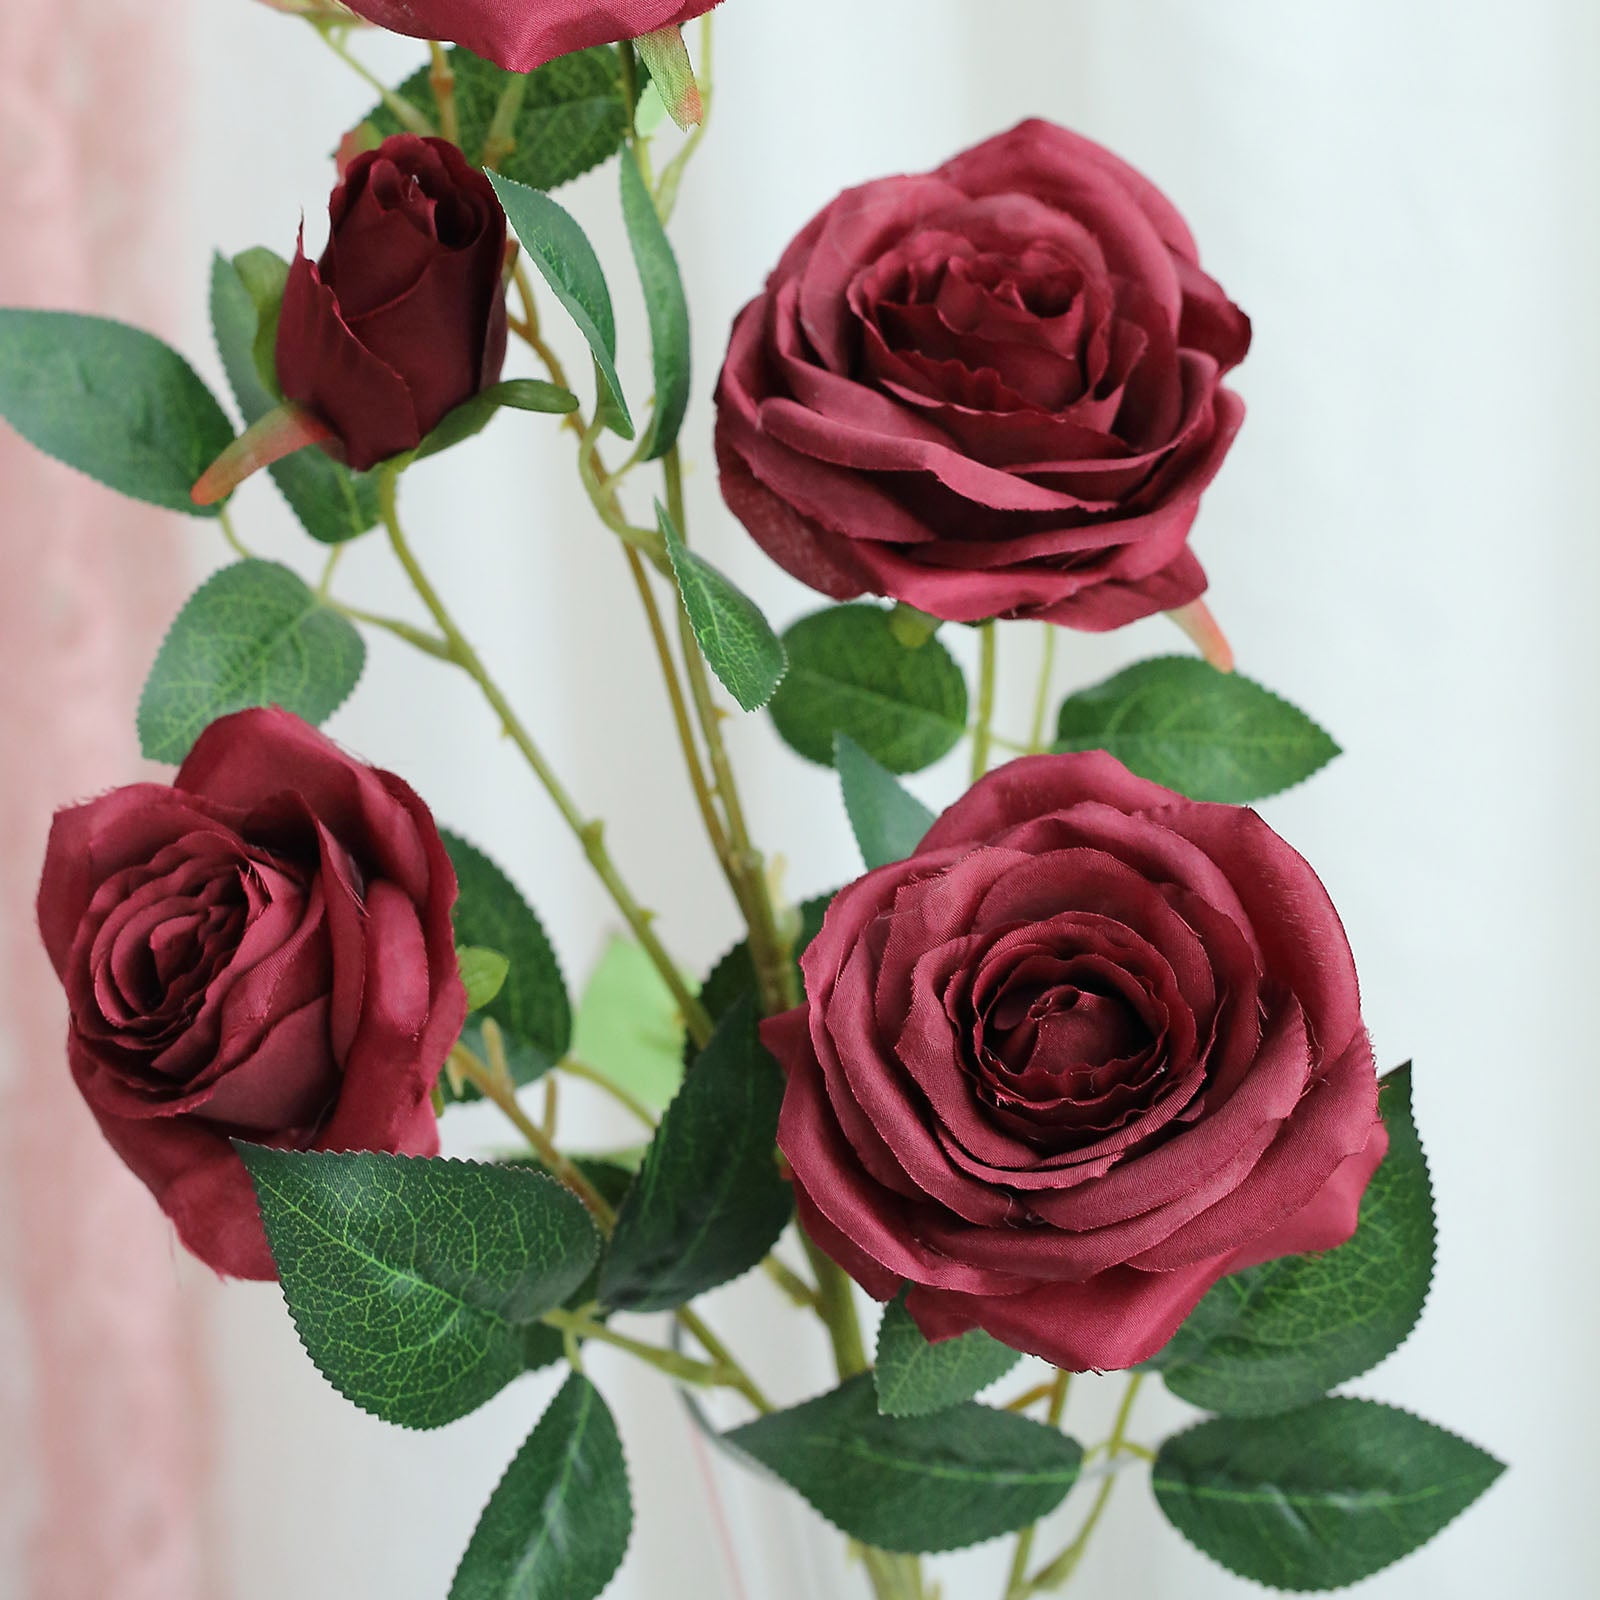 5 Large Rose Stems With Leaves for DIY Bouquets -  Norway